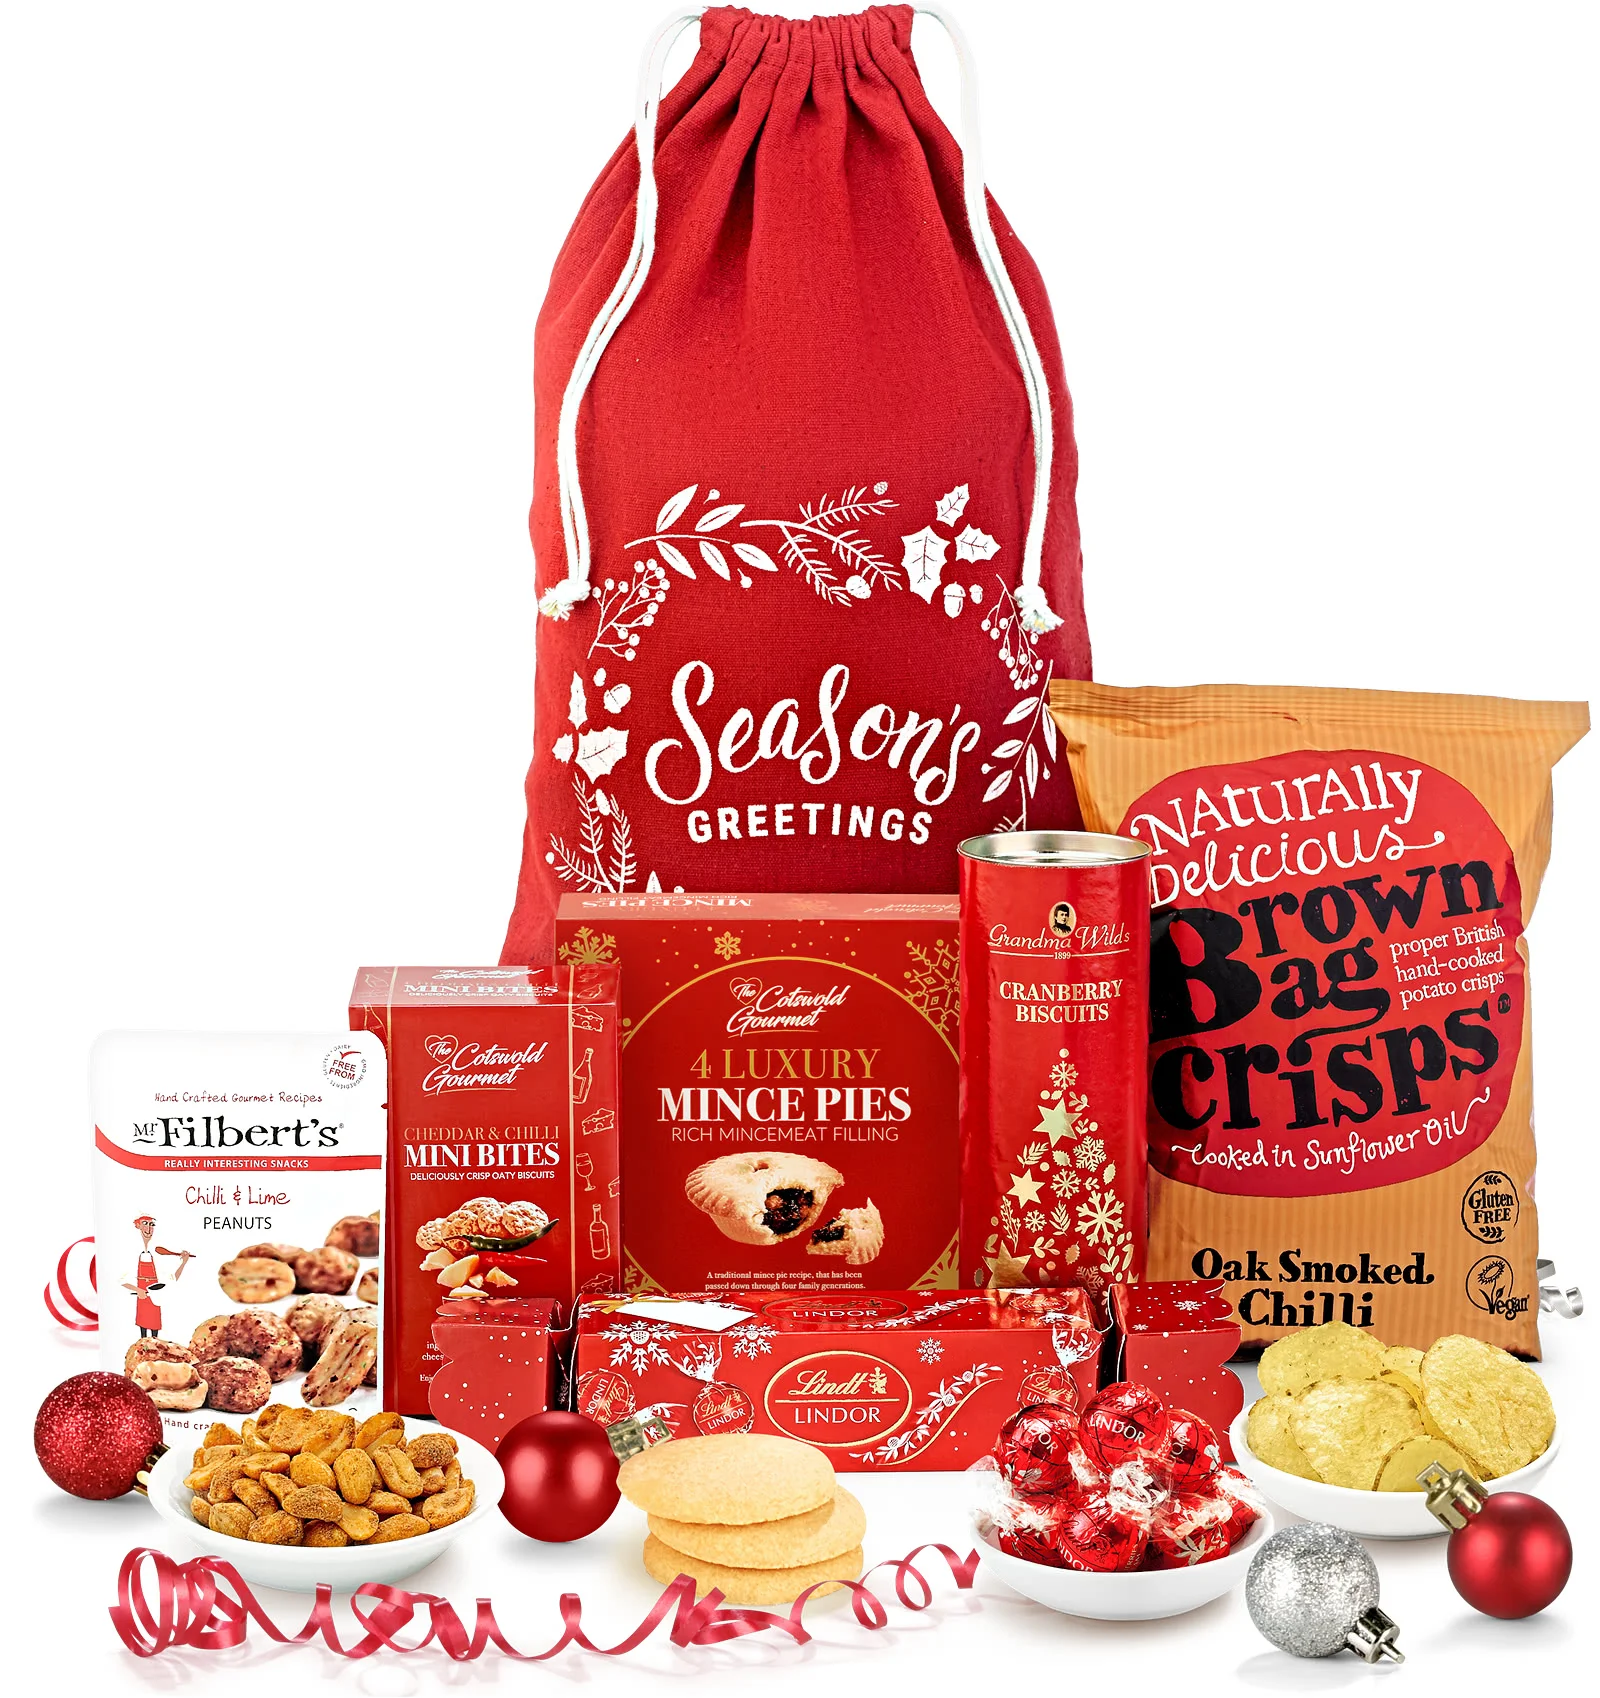 Send a Christmas hamper abroad with international delivery